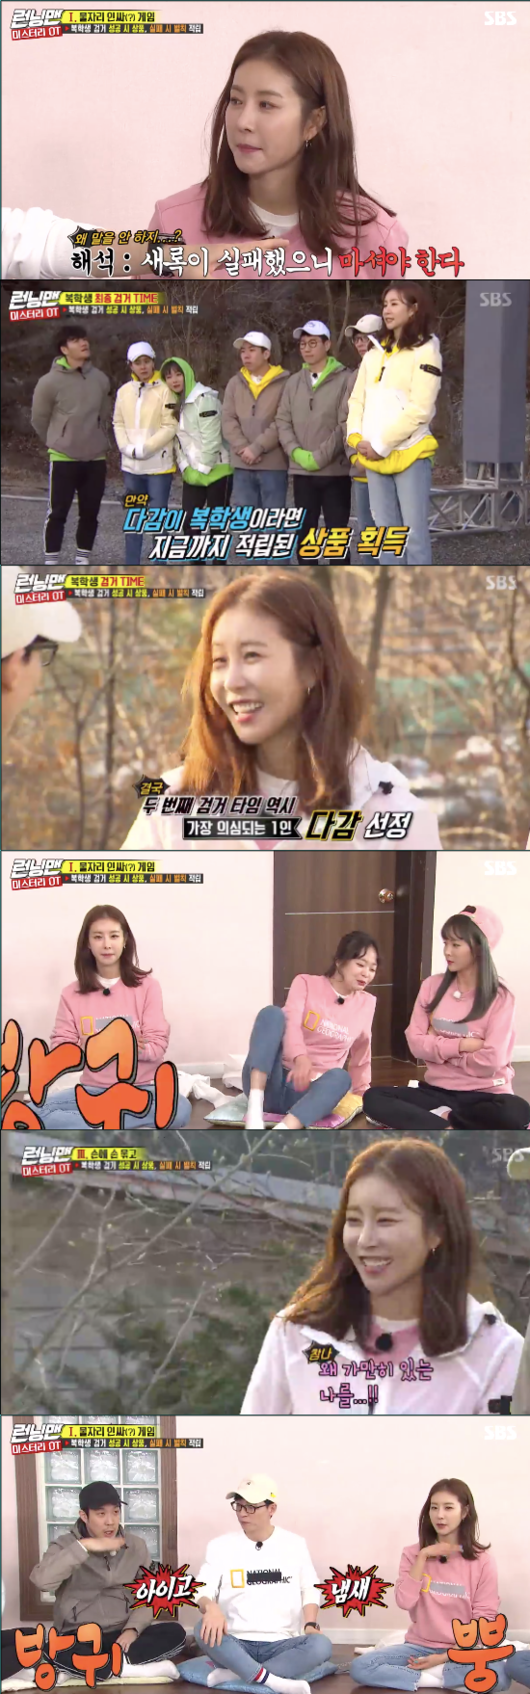 The Running Man student was not a do-good, but a low-end. The feeling of being suspected of being a return student continued to laugh at the feeling of injustice.SBS Running Man, which was broadcast on the afternoon of the 10th, was featured as a special feature of Running University OT (Orientation), and Hong Jin-young, Han Da-gam and Kim Sae-rok appeared as guests.On this day, Running Man held a Mystery OT Race to arrest a student who was questioned among freshmen. If the student was arrested through a total of three rounds of OT Game, the freshman won.Handagam showed off his fullness from the first round of the Game, and then he drank the juice of the Kalamansi.The members then doubted that the crew gave a hint that the returning student used a lot of words that revealed his age and ranking throughout the Game.The members avoided the sense that they would be selected for the final round.As a result, the feeling of doing was humiliated as the first guest left in the couple selection.After that, the members pointed out that they would do it as a returning student even during the final round of the final return student.But the real student was not a do-good, but a do-good. The student Haha received a hidden mission and used the word brother during the Game, and the word capchan.Haha succeeded in the missions until the end, and the members were hit by a water bomb. After selecting three people to be punished, Yoo Jae-Suk, Ji Suk-jin and Lee Kwang-soo were punished.This feeling was driven to return students and failed to find a return student, but it was a great fun. The charm of the wrong but splashing here gave viewers a pleasant energy.Running Man